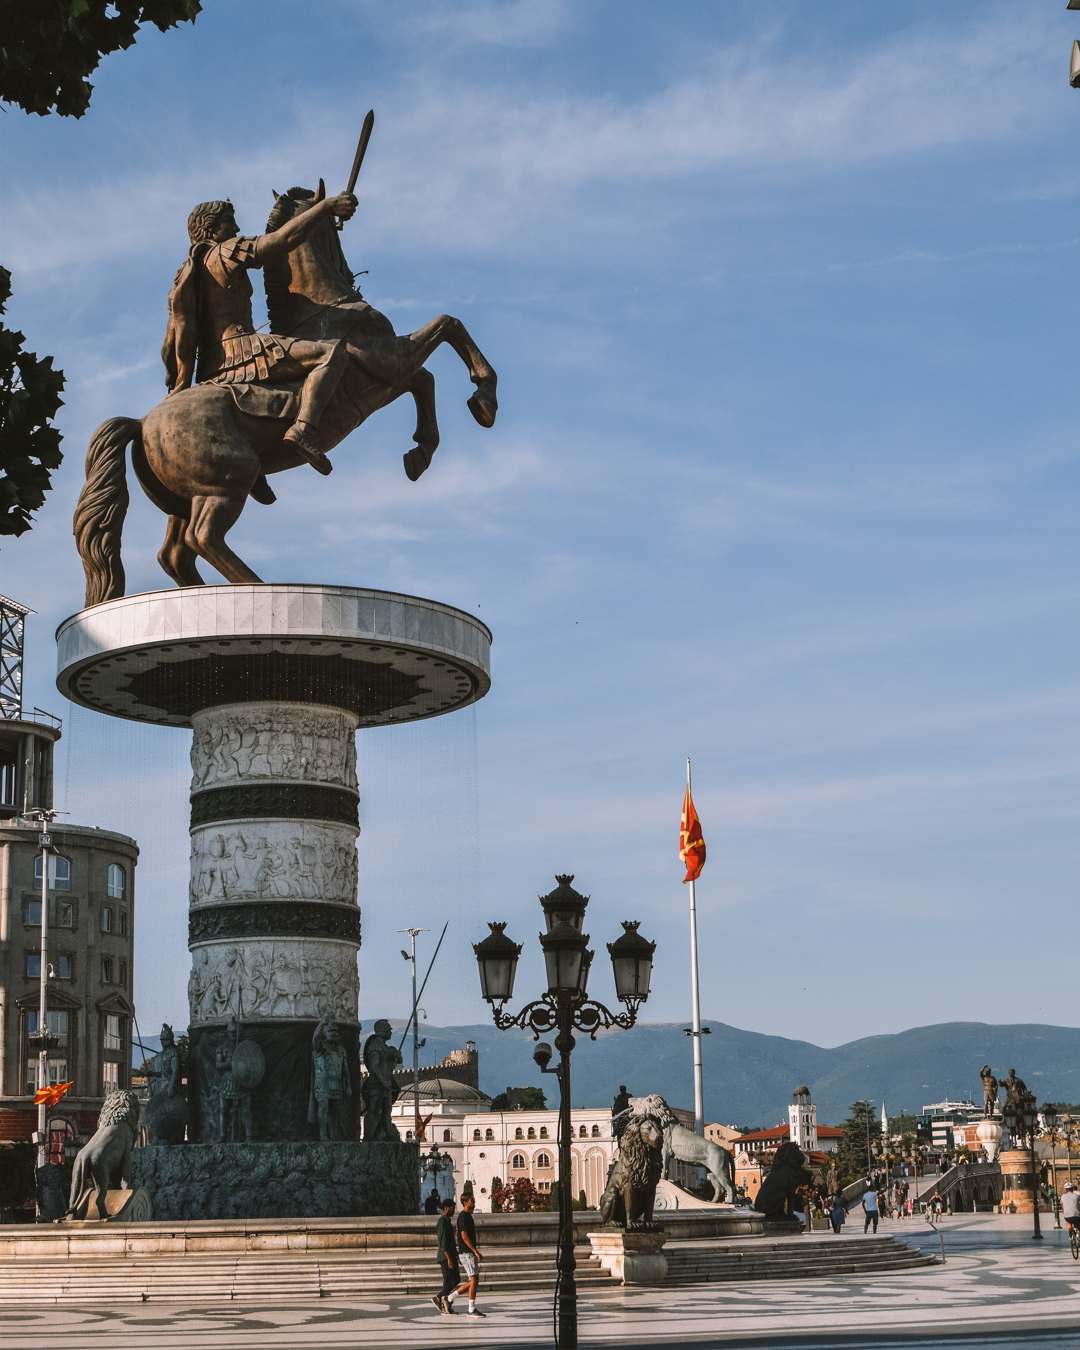 Marvel at the sculptures in Macedonia square